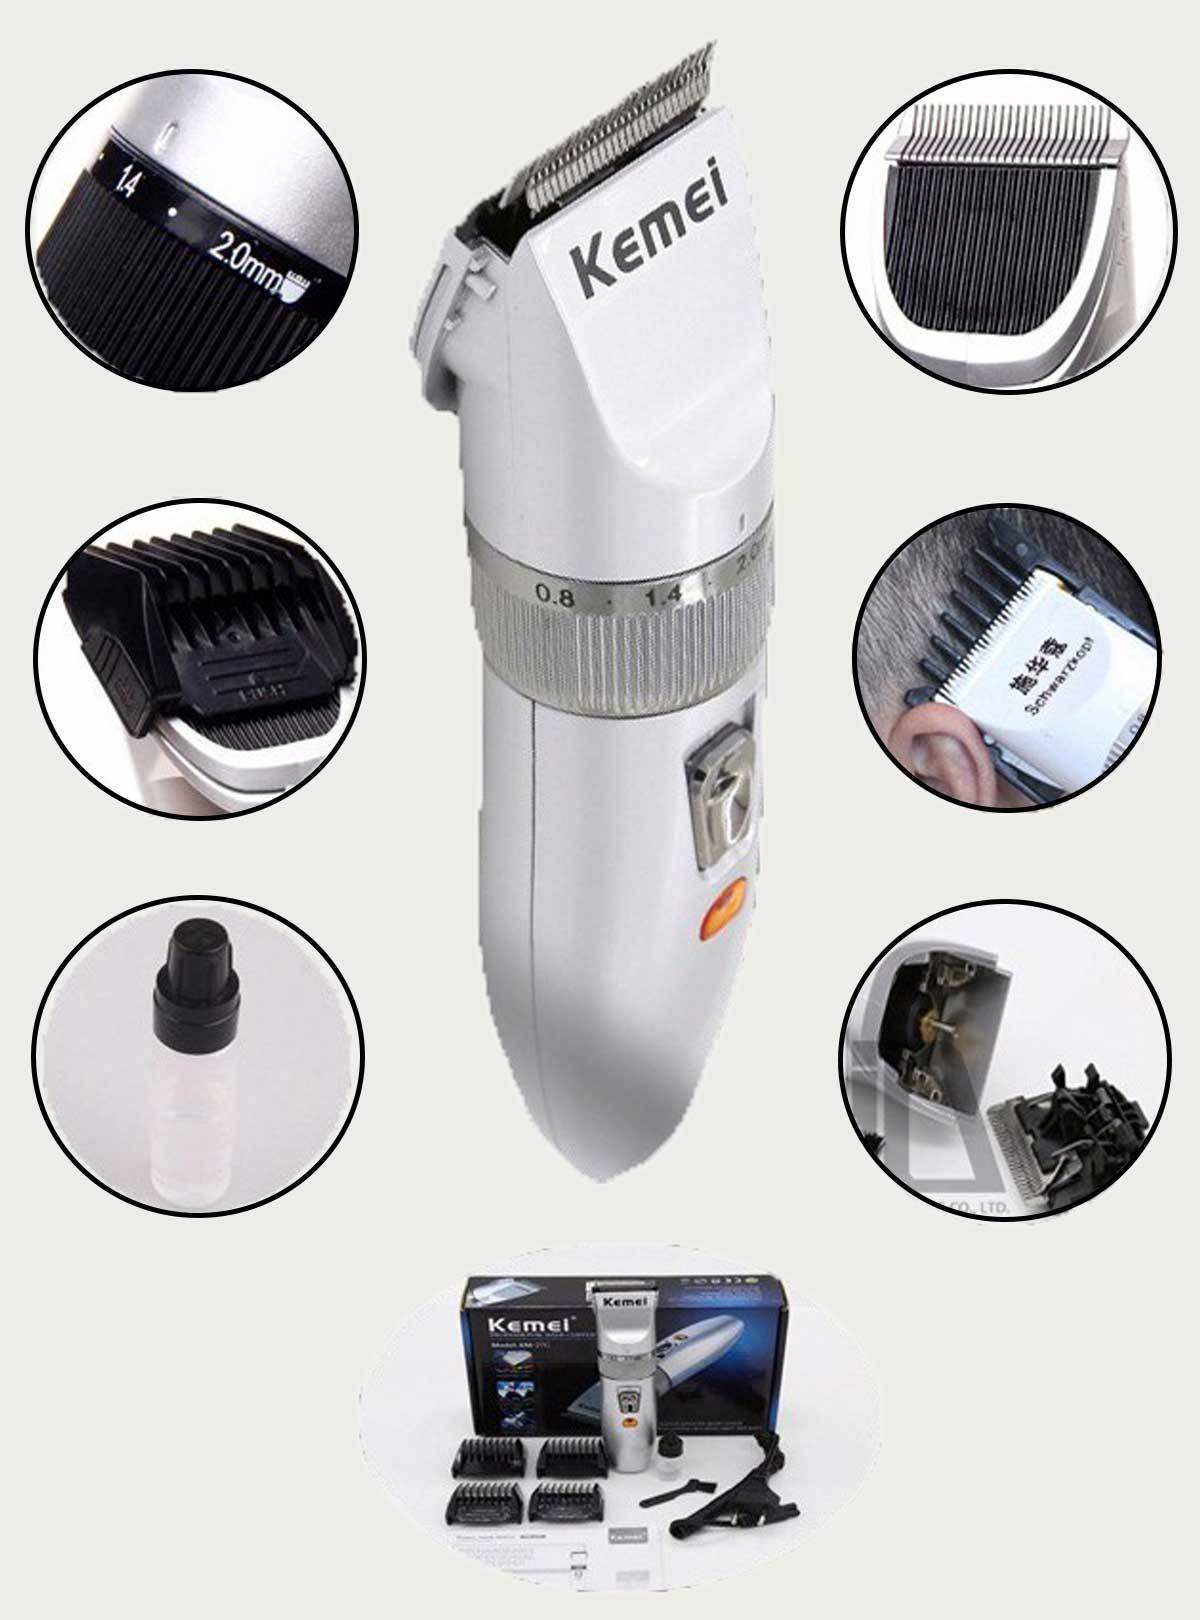 kemei km 27c trimmer review